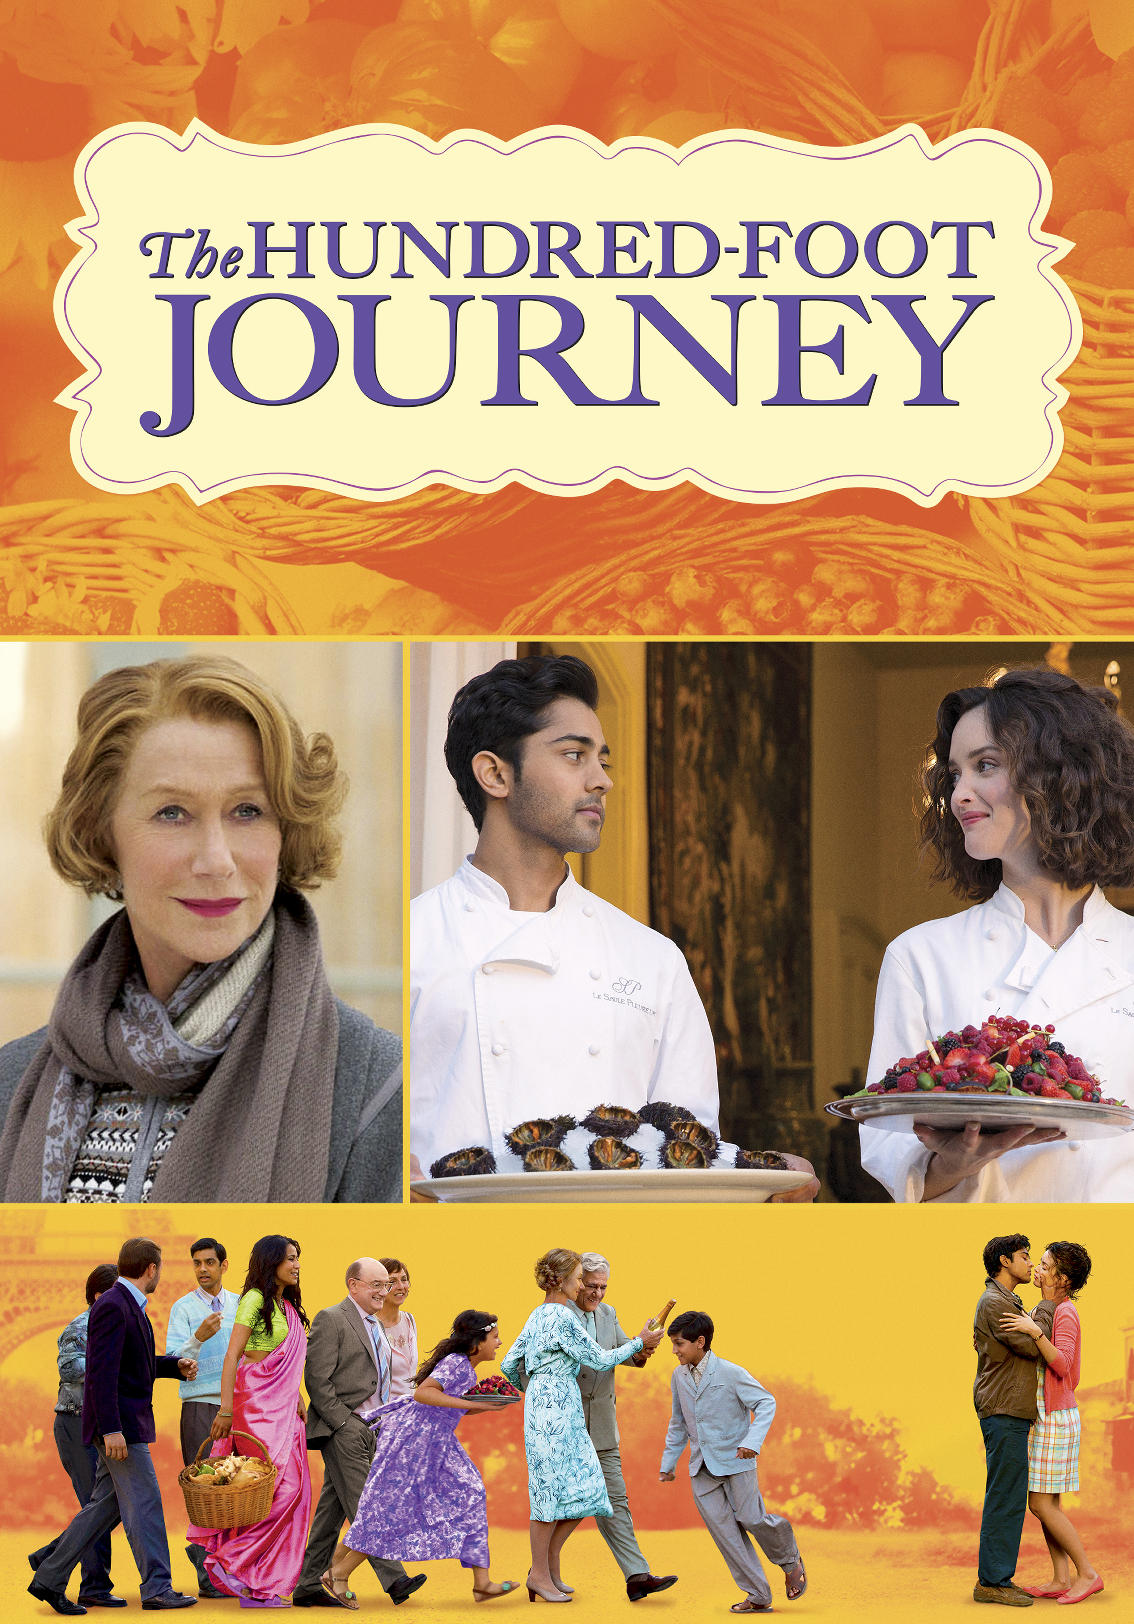 is the hundred foot journey based on a true story